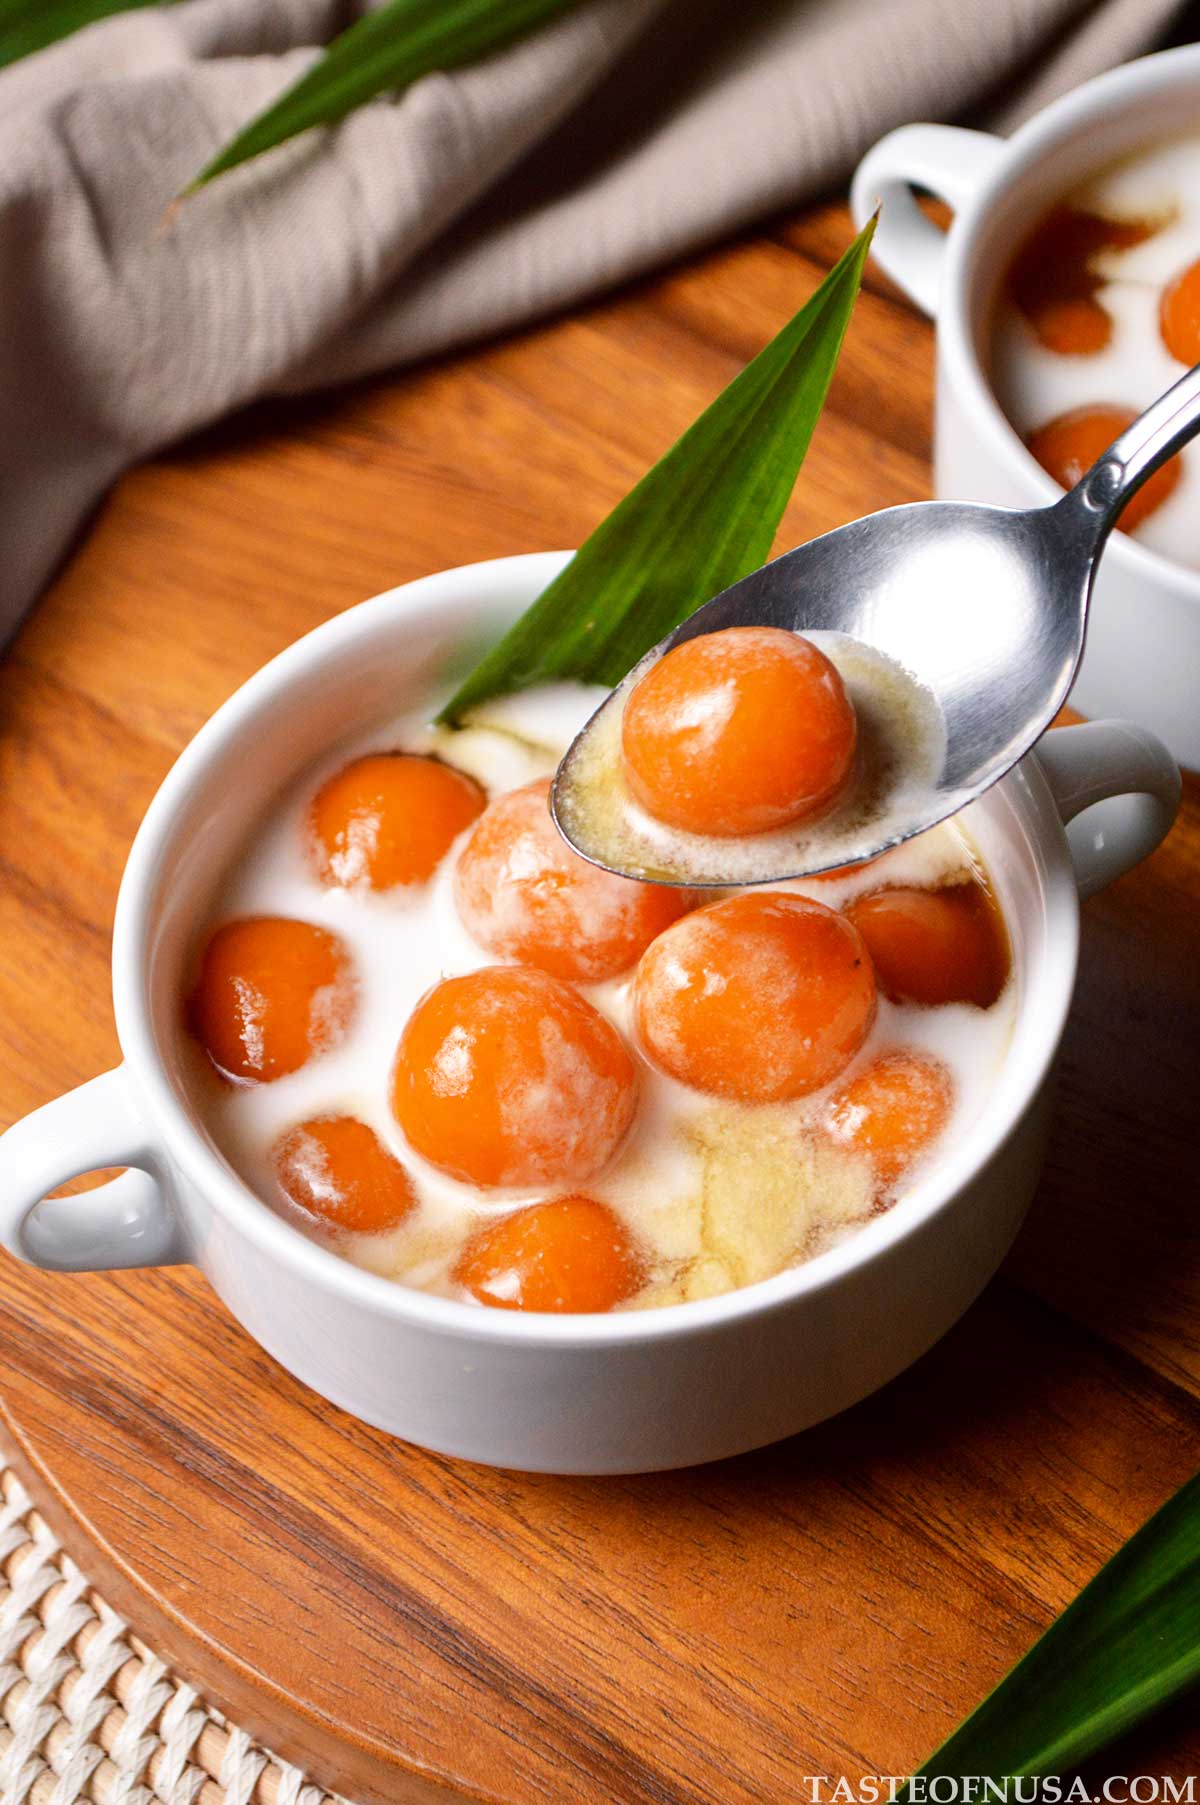 biji salak or indonesian sweet potato balls in palm sugar syrup and drizzled with thick coconut milk